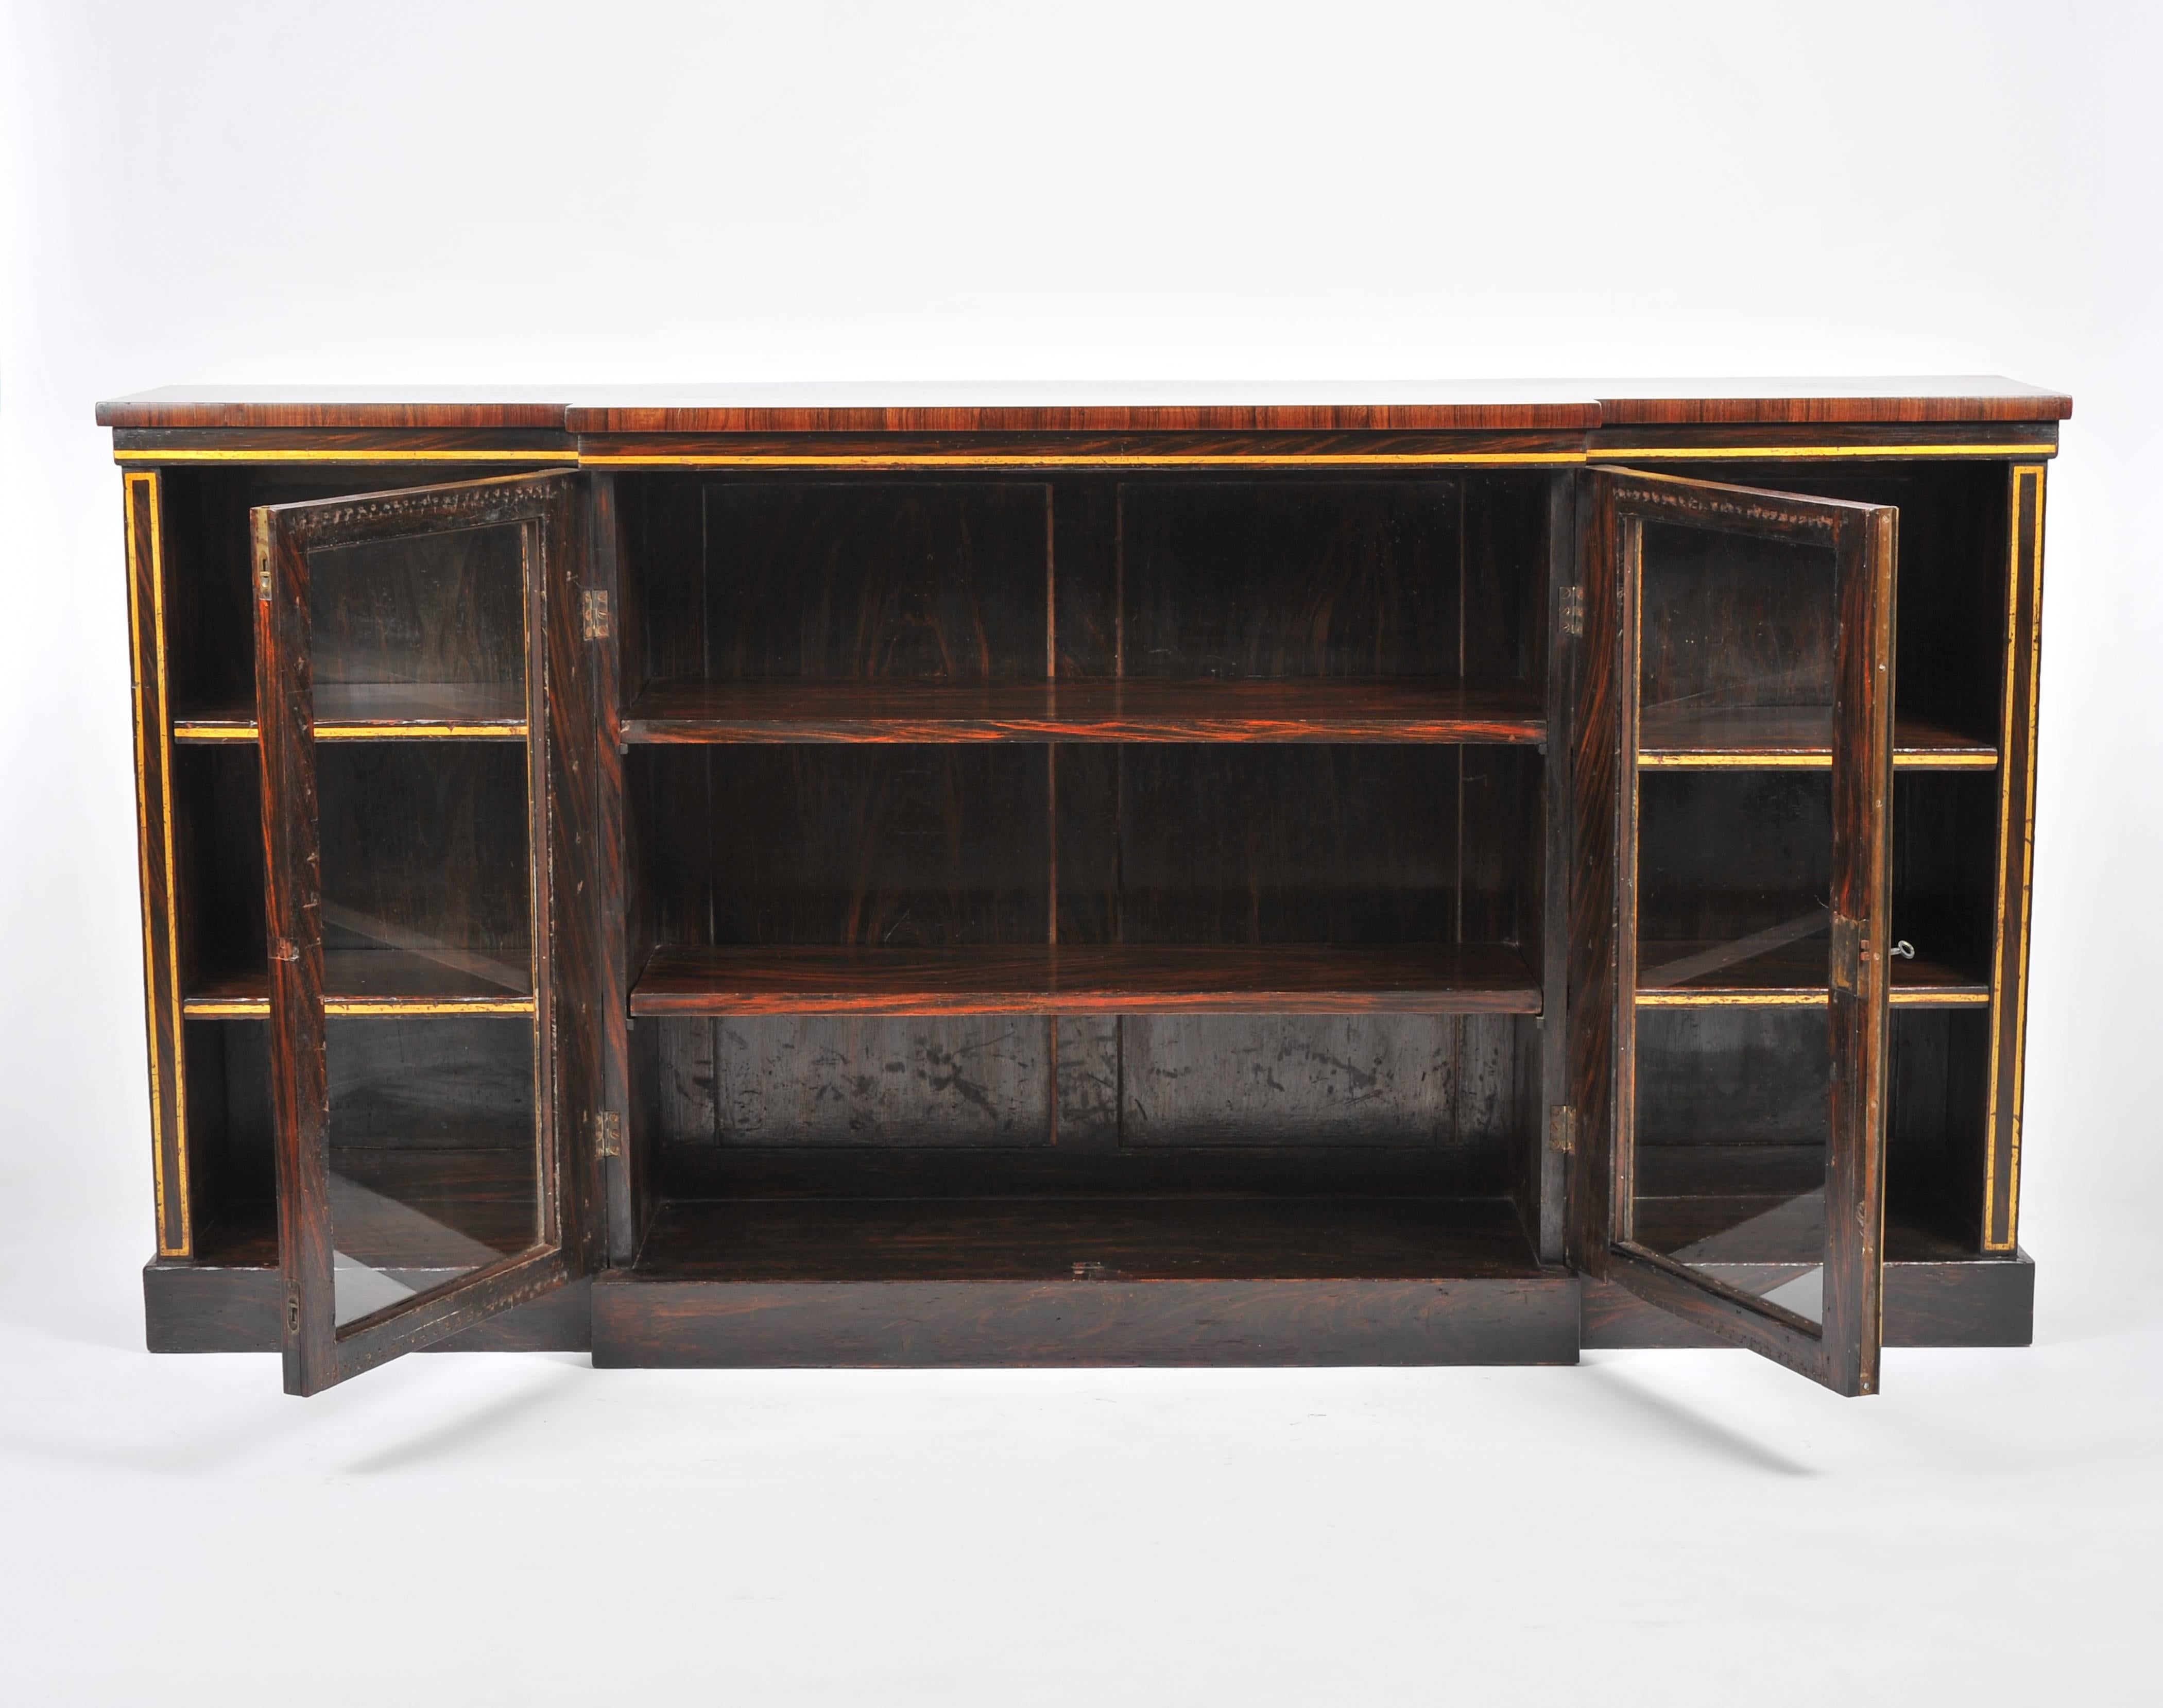 This magnificent Regency Rosewood breakfront bookcase features 2 central glass doors with open shelves on both sides. The bookcase has gilt detailing and rests on a plinth base. It measures 72 in – 183 cm wide, 14 in – 35.5 cm deep and 36 in – 91.5